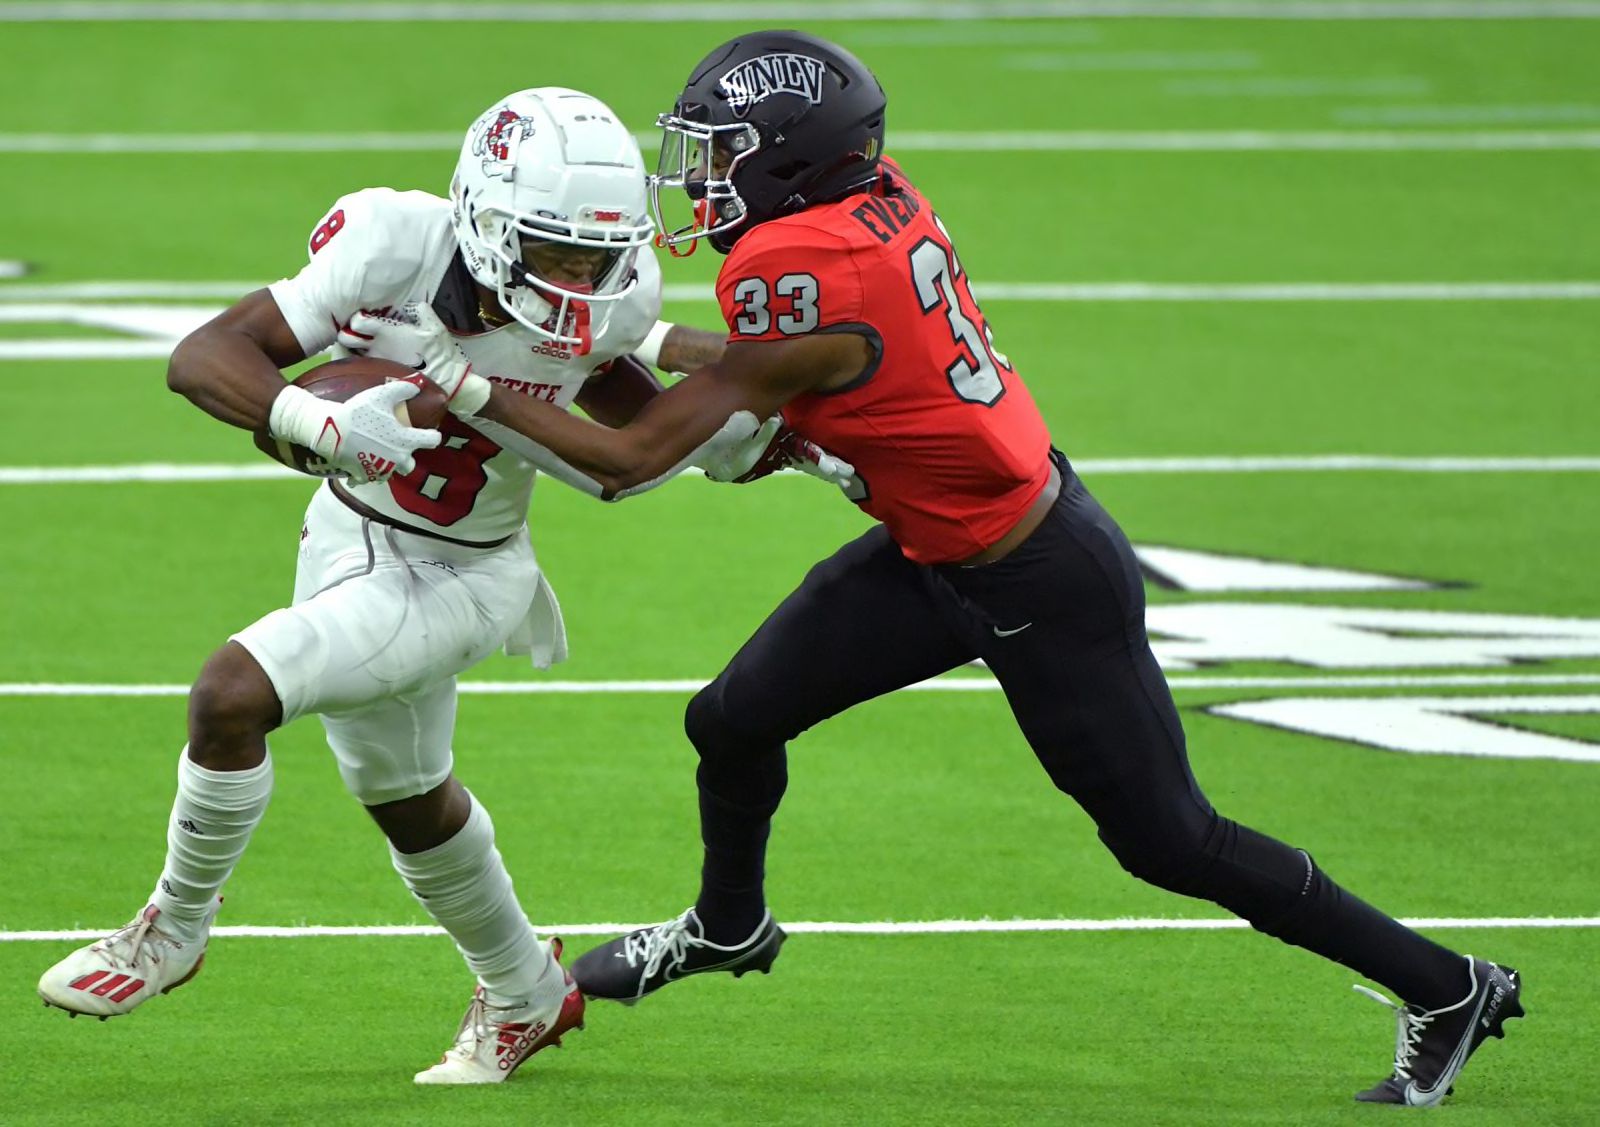 UNLV Football: Can Rebels overcome schedule to show improvement? - Page 3